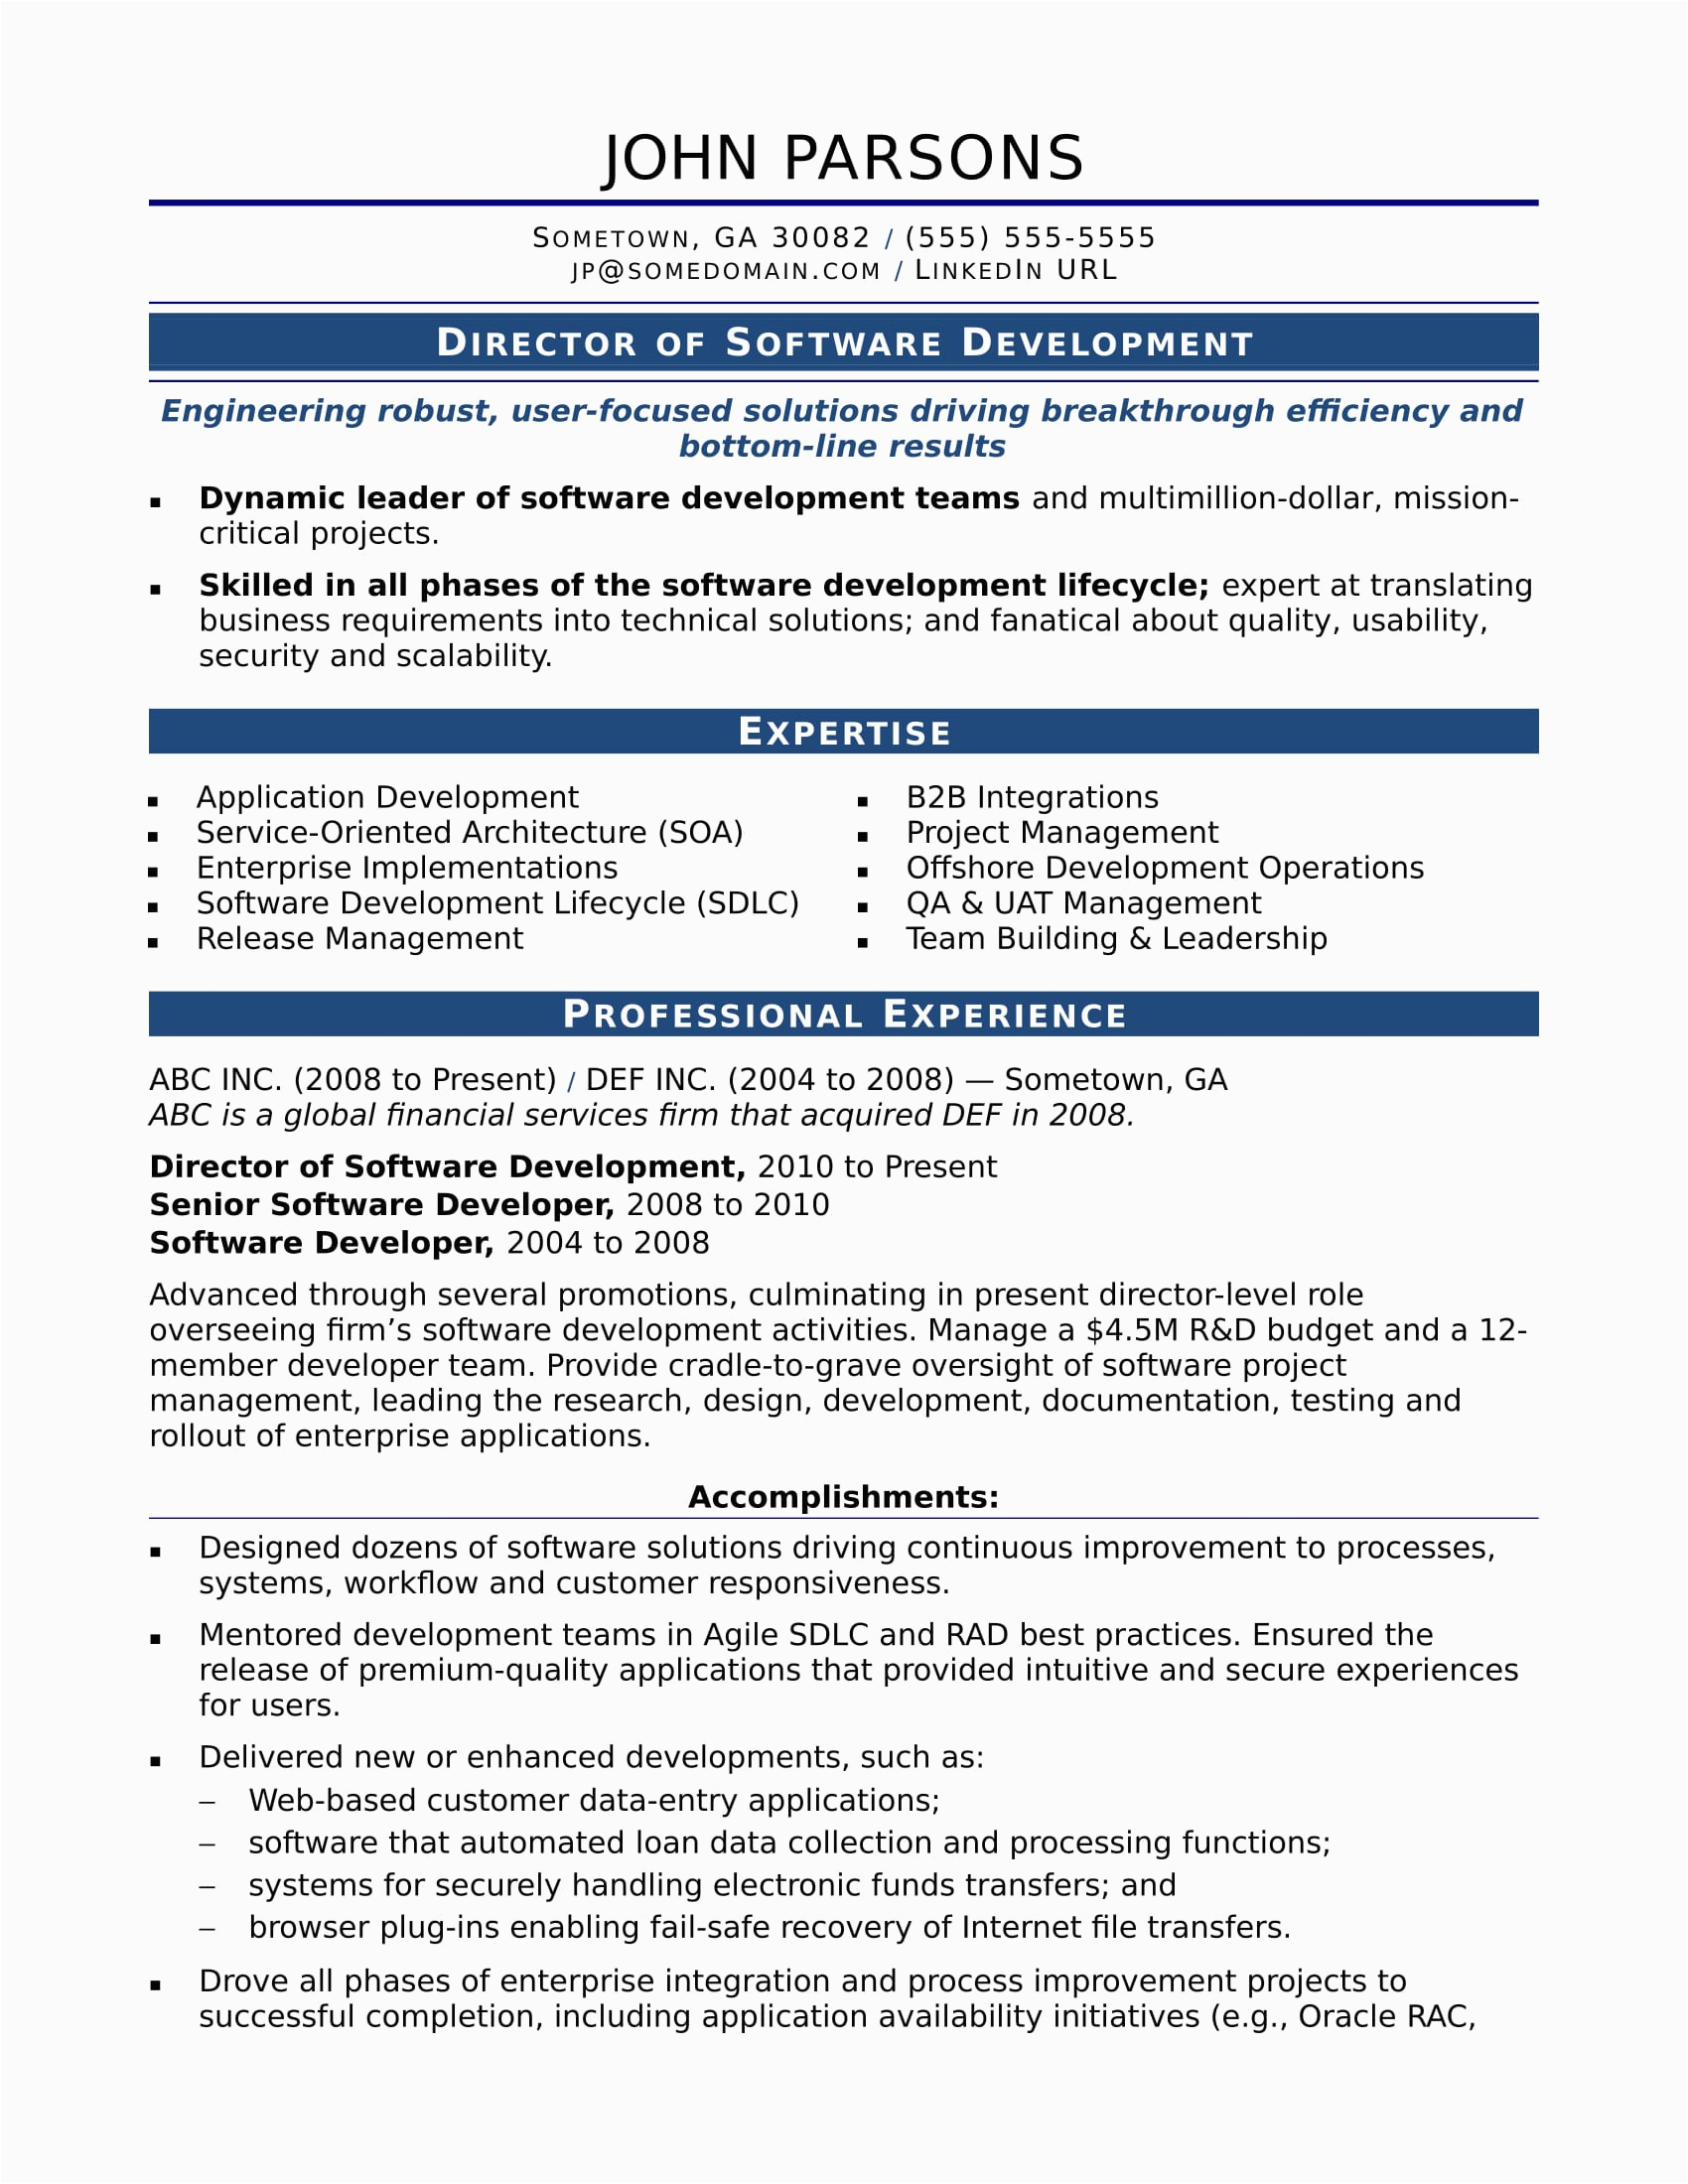 Sample Of Resume for Experienced Person Sample Resume for An Experienced It Developer